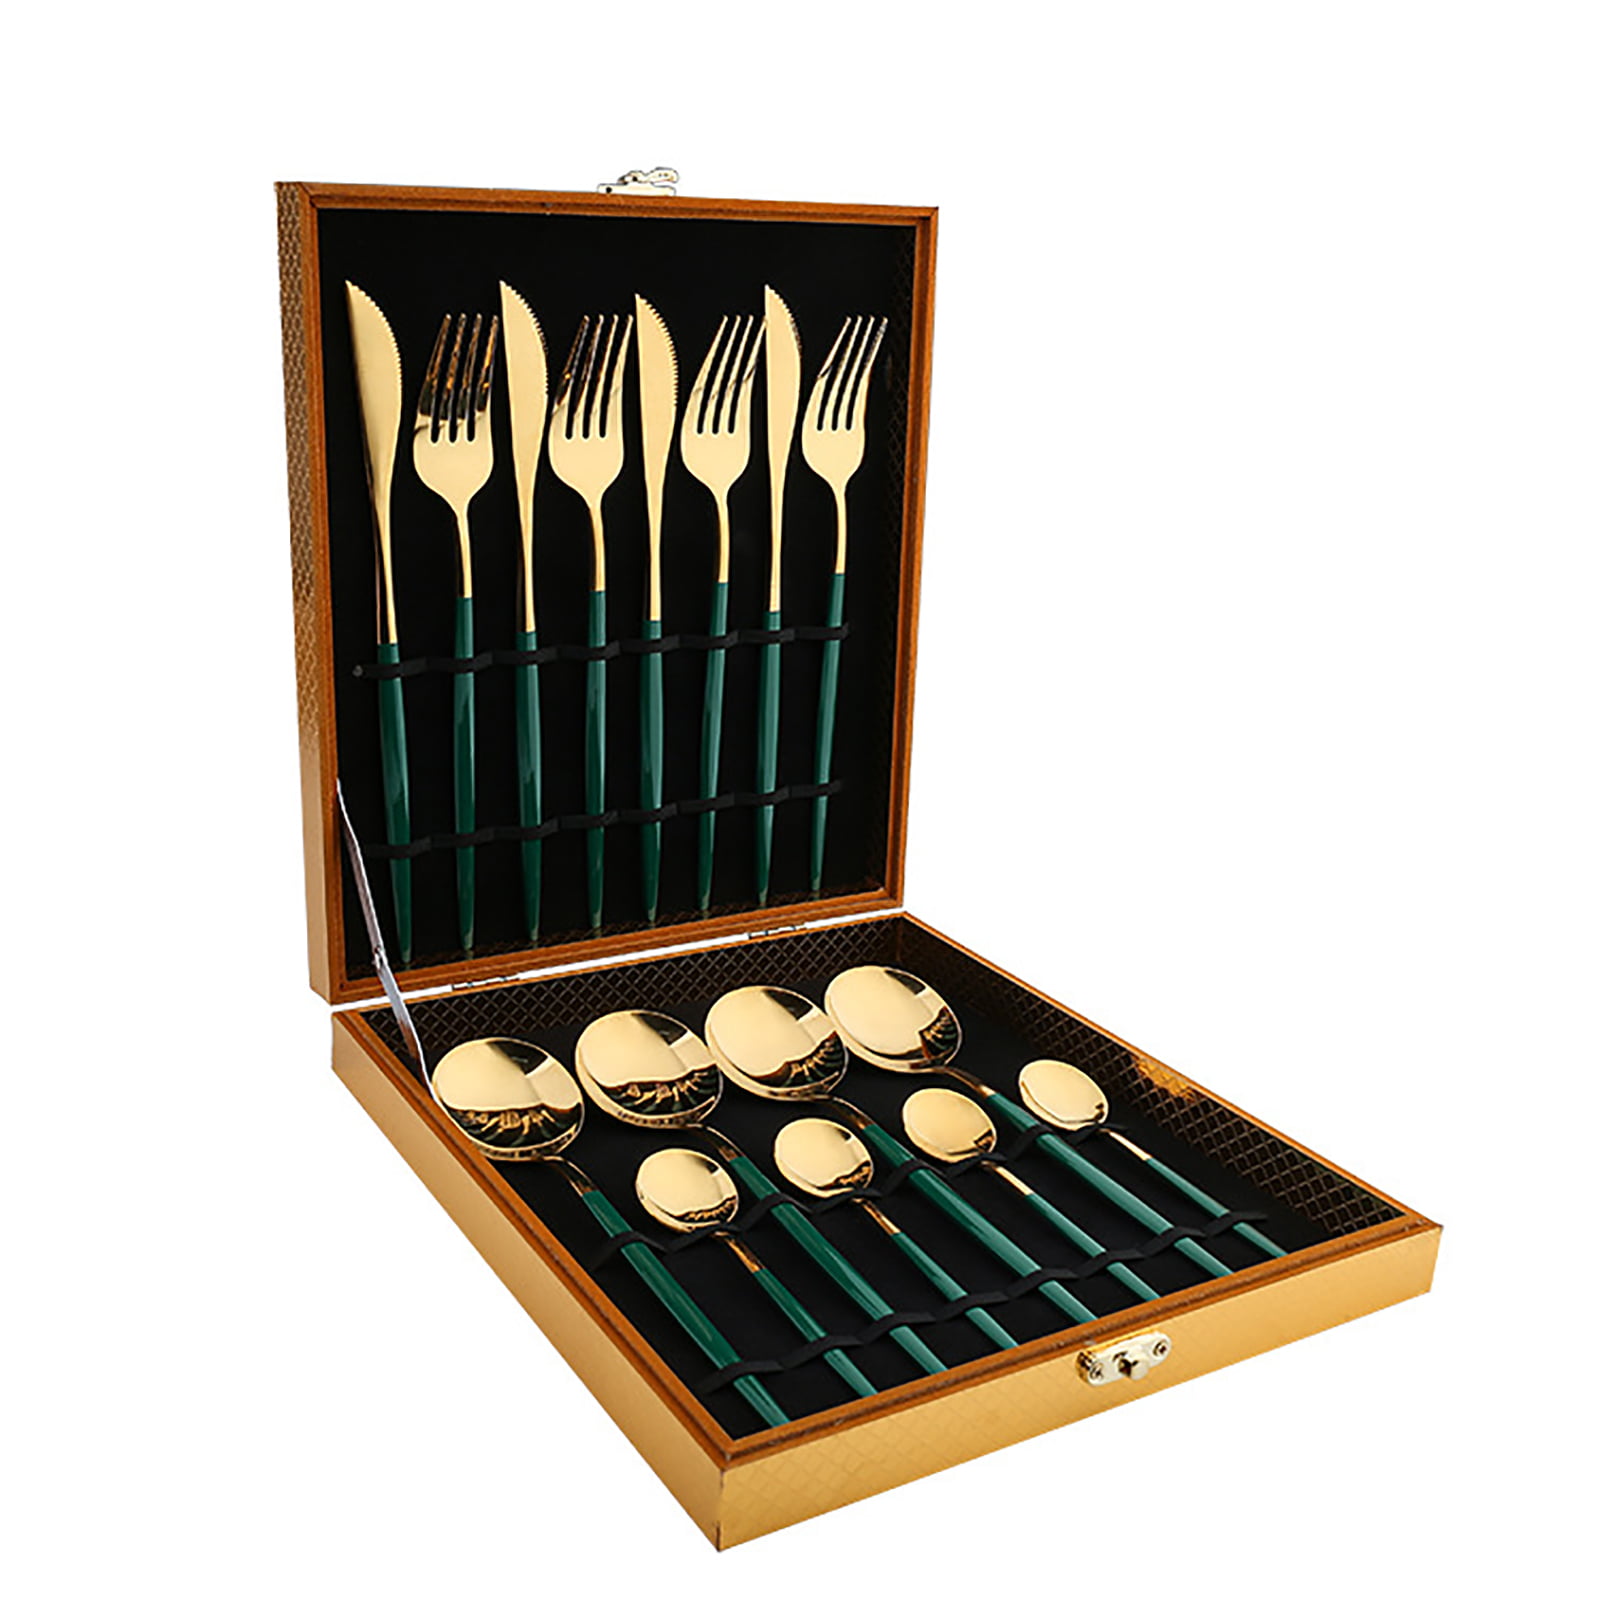 BRAND NEW 16 PIECE STAINLESS STEEL CUTLERY SET WITH BOX 